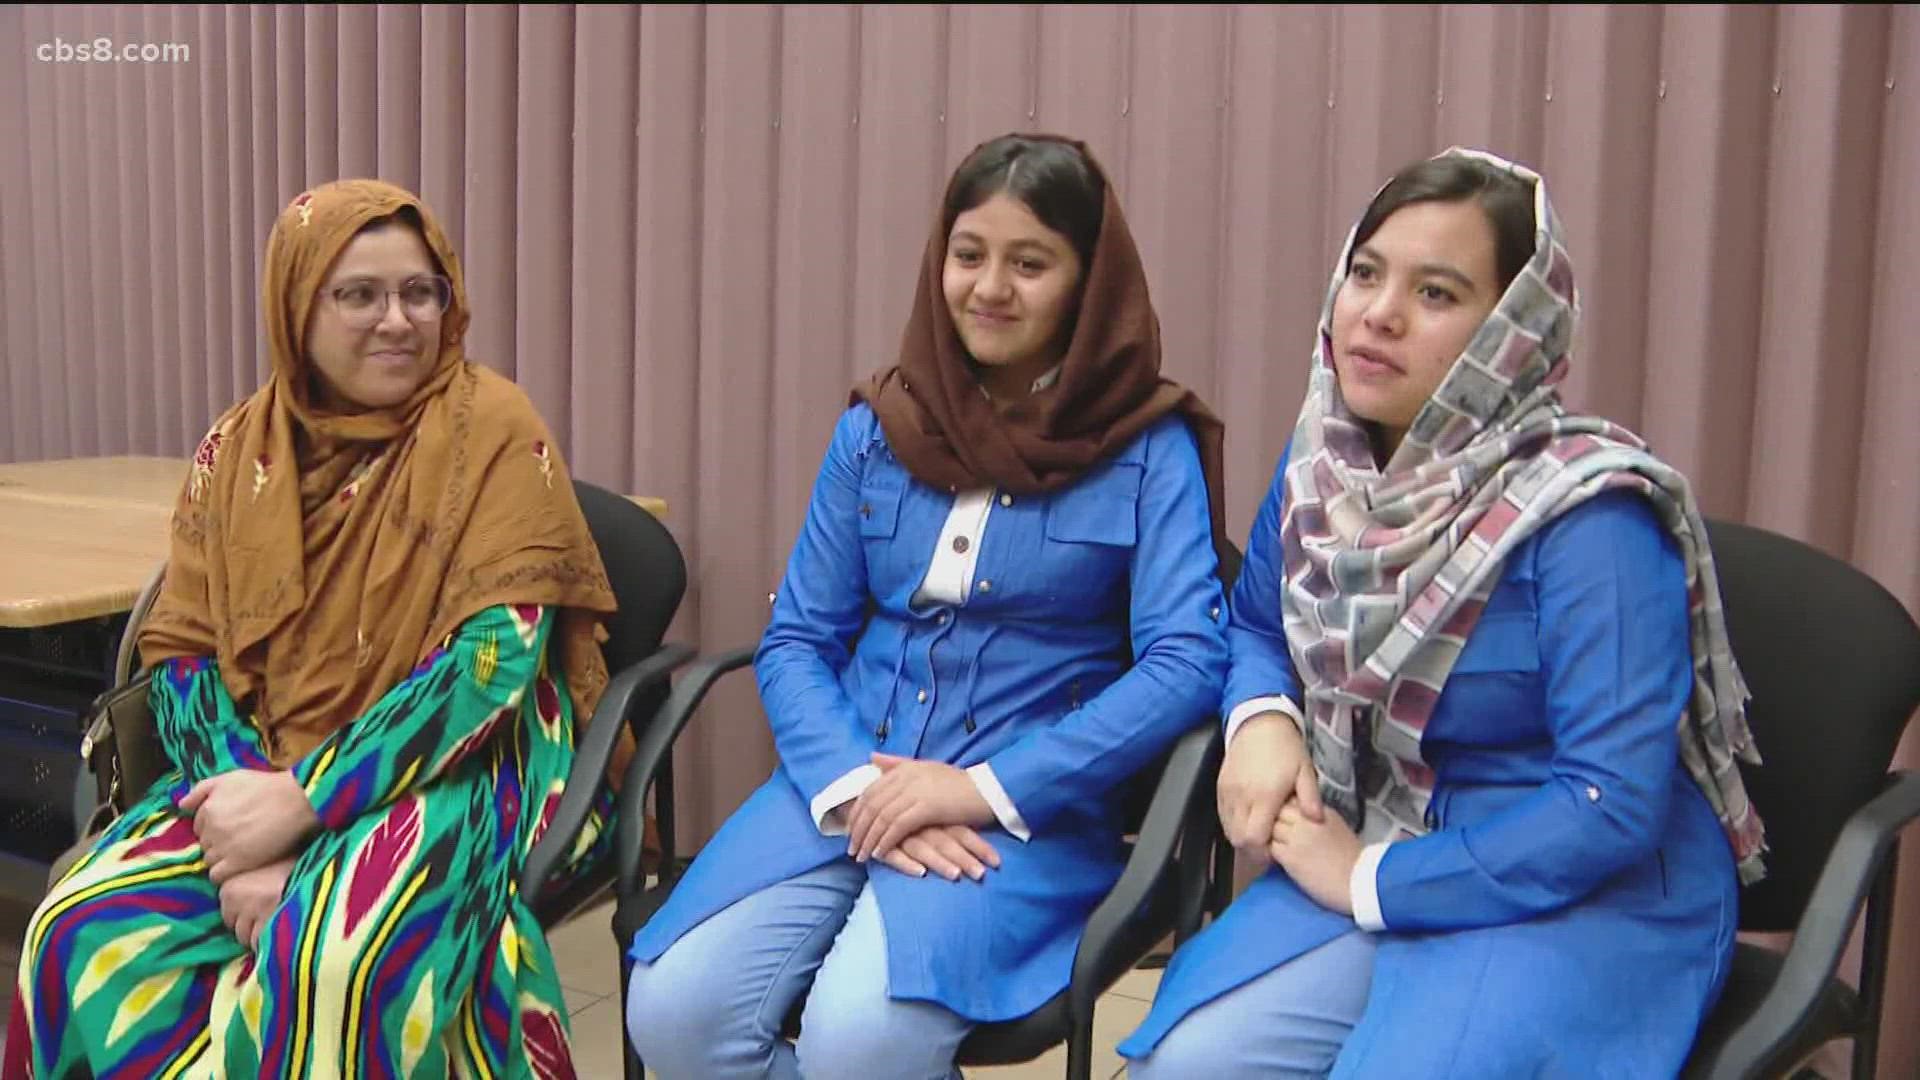 An Afghan family shares their gratitude for being welcomed in San Diego but worry about their family who remain behind.